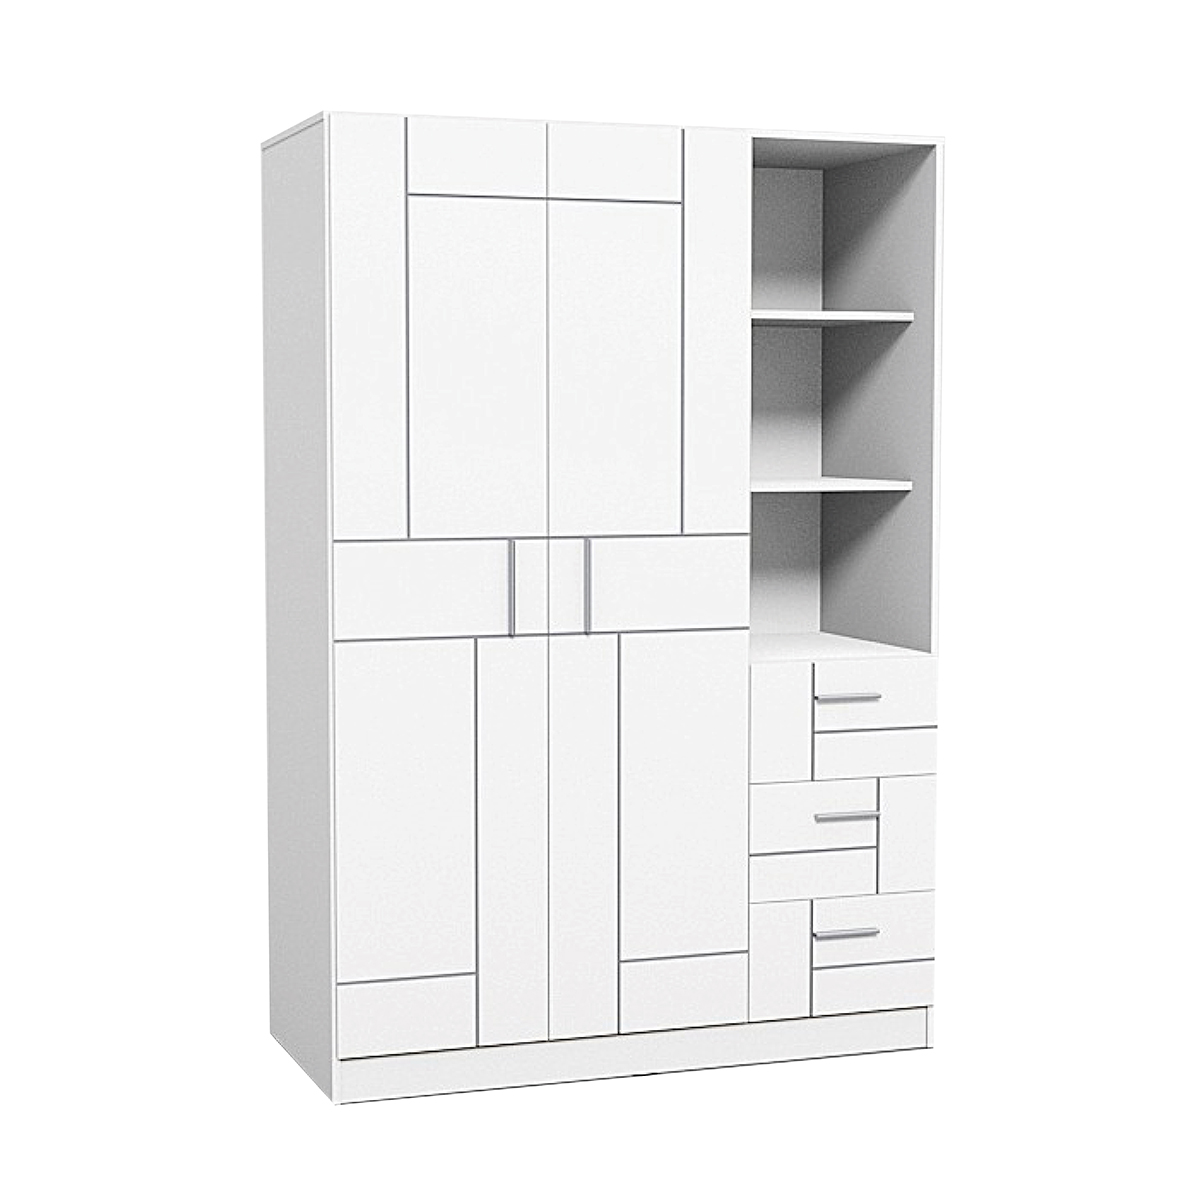 48033::XHB-745::A Sure wardrobe with 4 swing glass doors and 2 drawers. Dimension (WxDxH) cm : 163.8x62x220. Available in Oak SURE Wardrobes SURE Wardrobes SURE Wardrobes SURE Wardrobes